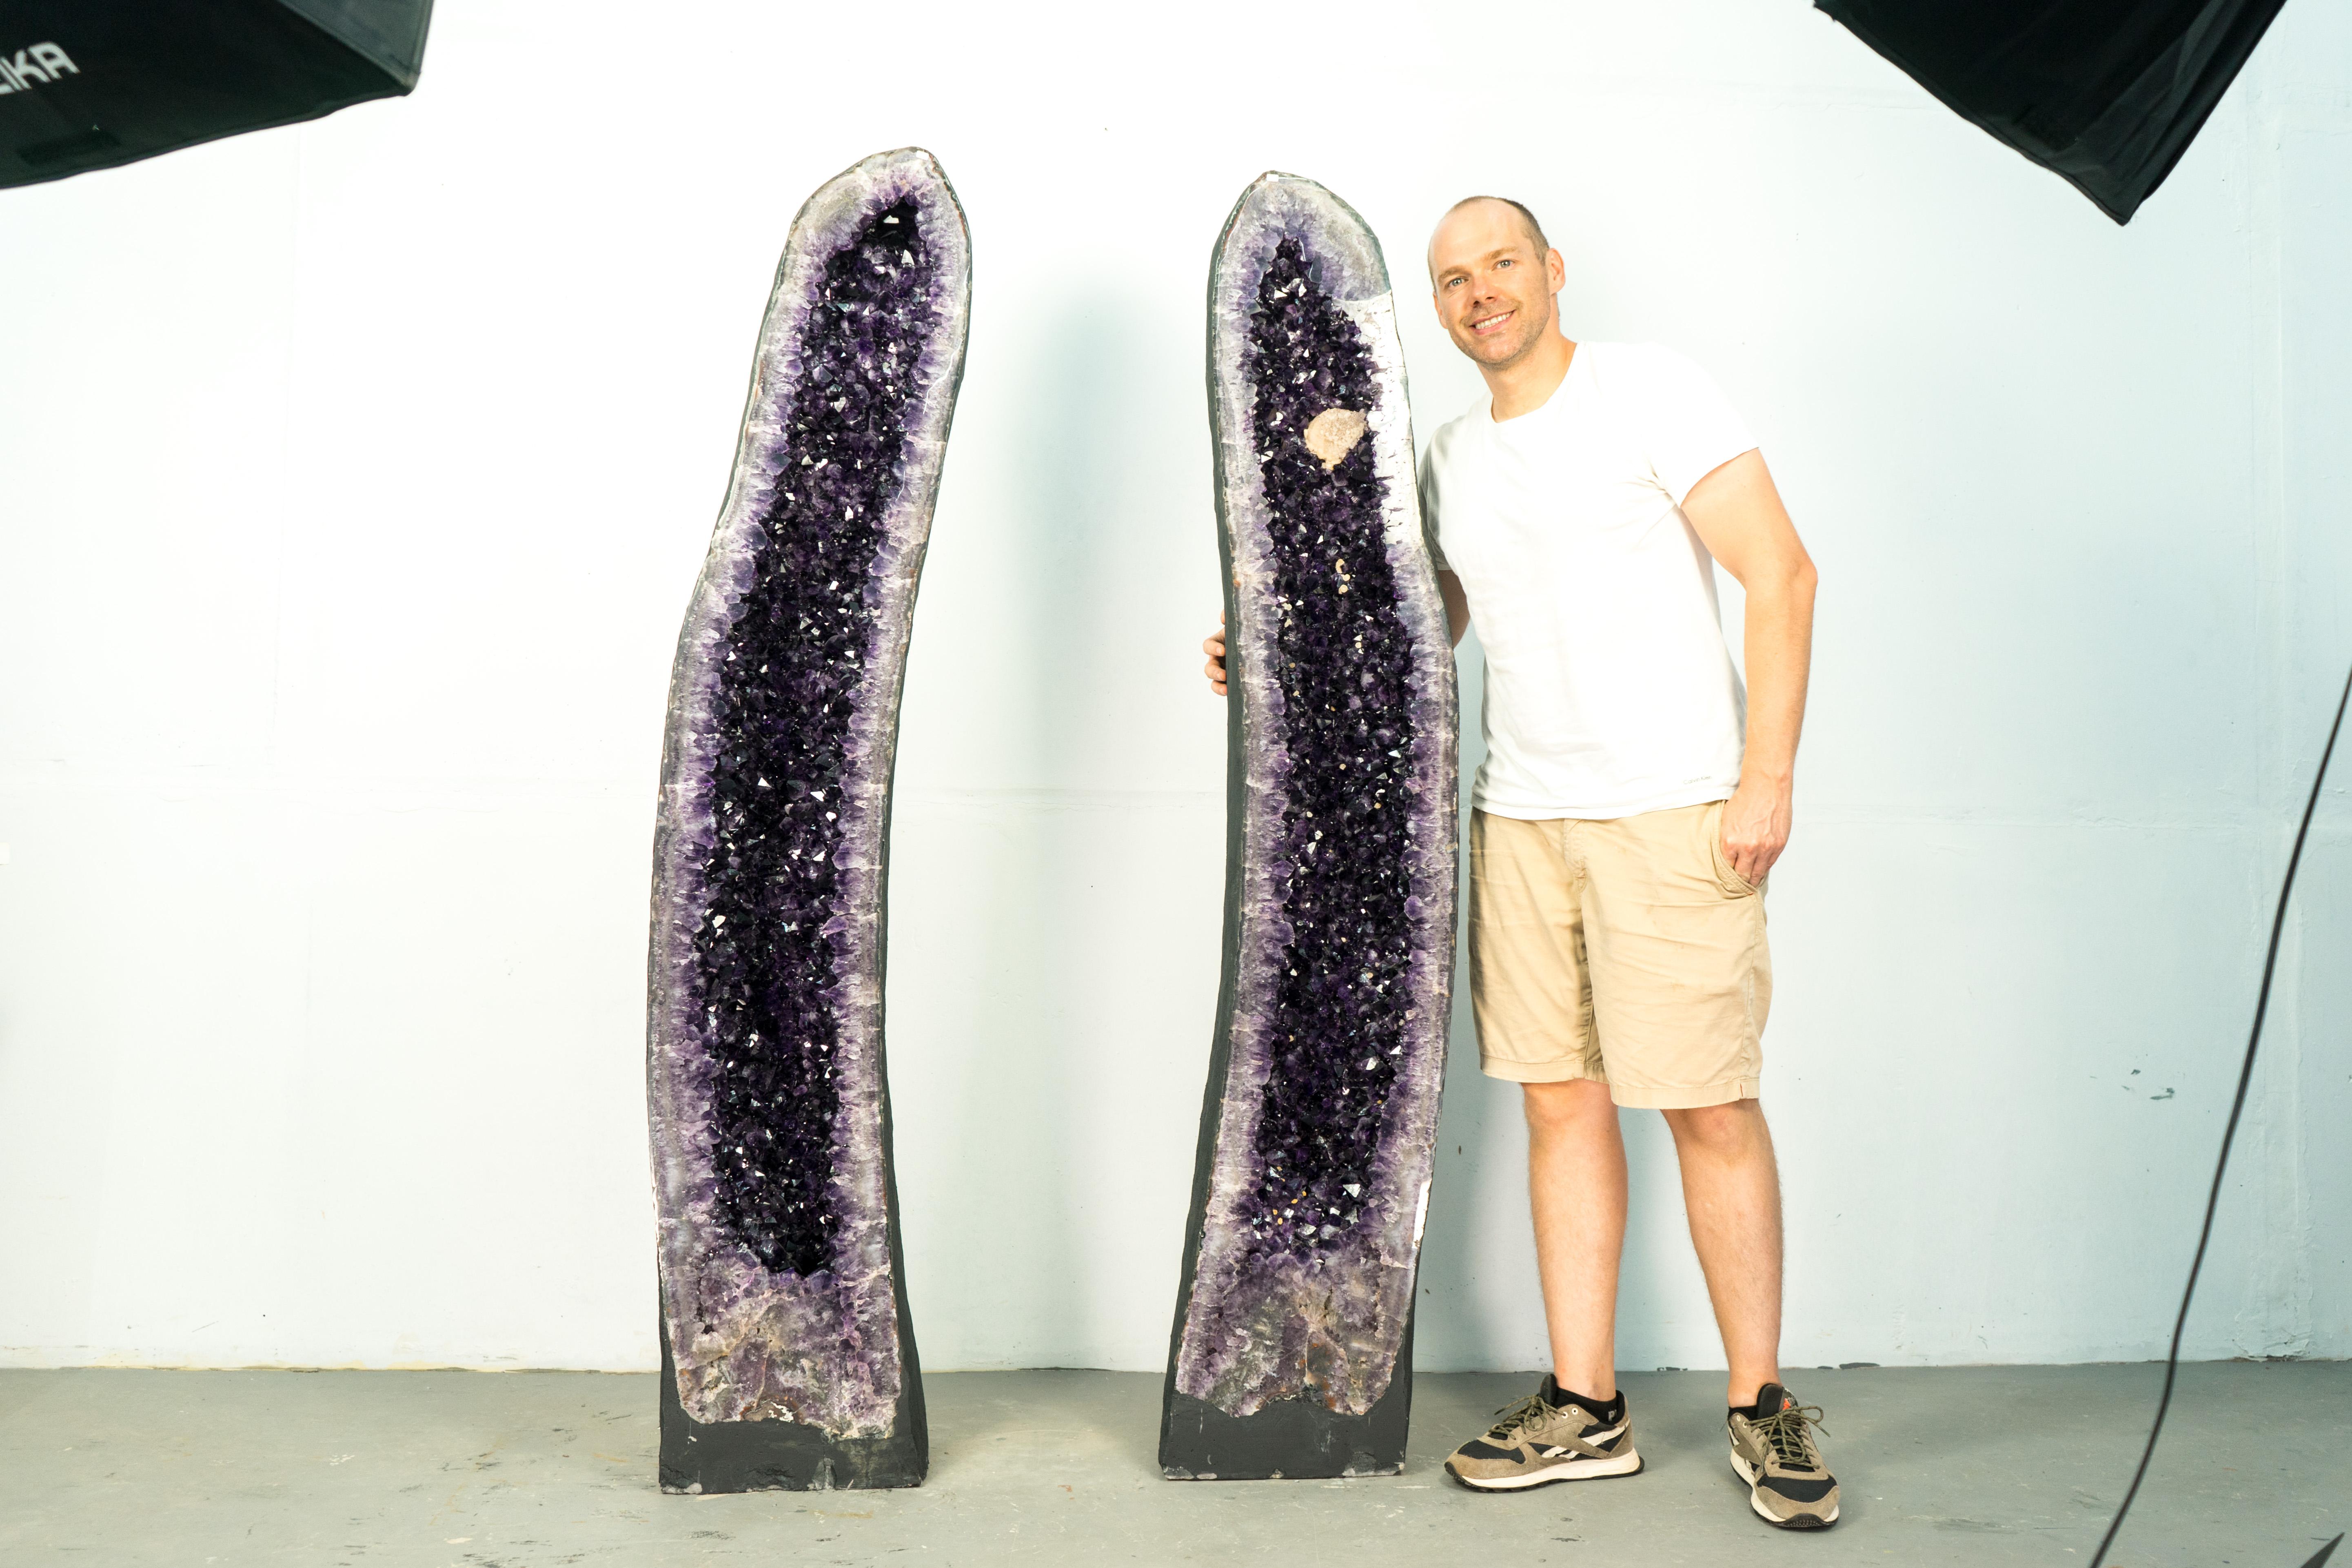 Brazilian Pair of High-Grade Giant Amethyst Cathedral Geodes with Calcite - 6 Ft Tall For Sale